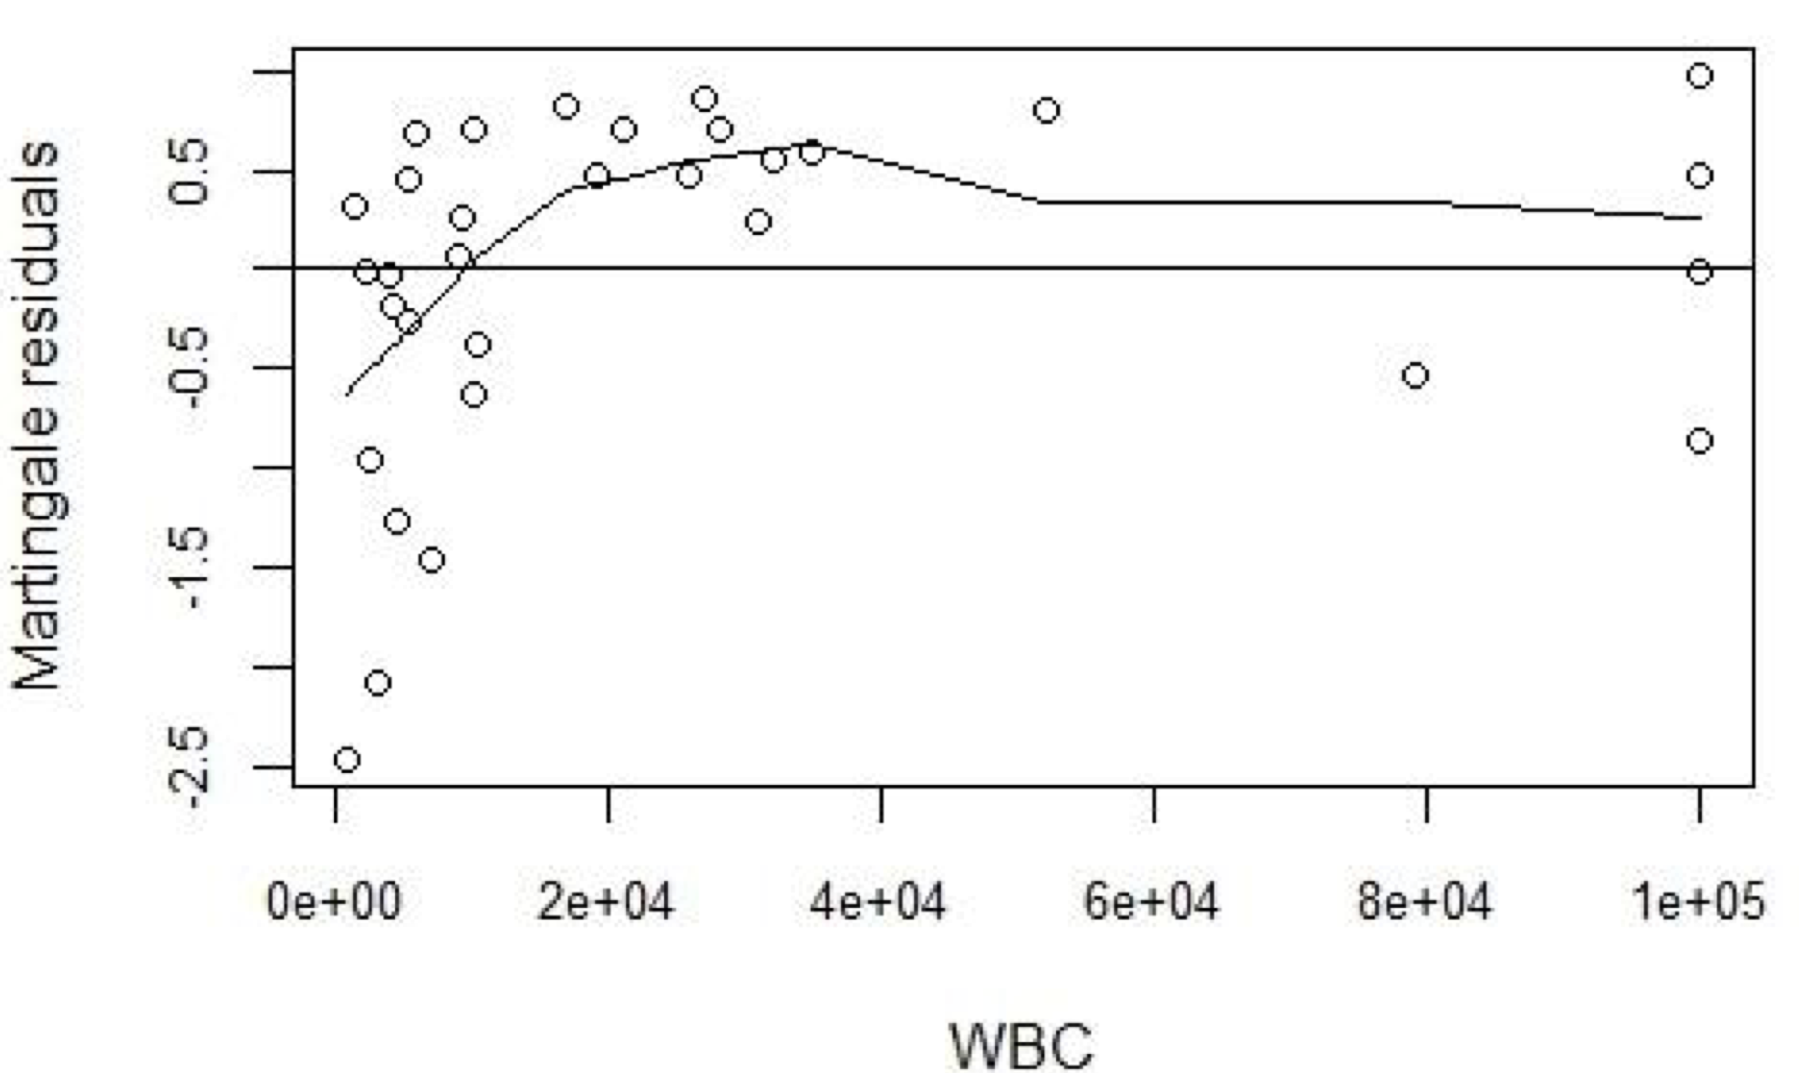 Plot of Martingale residuals (from a model with AG only) against WBC.